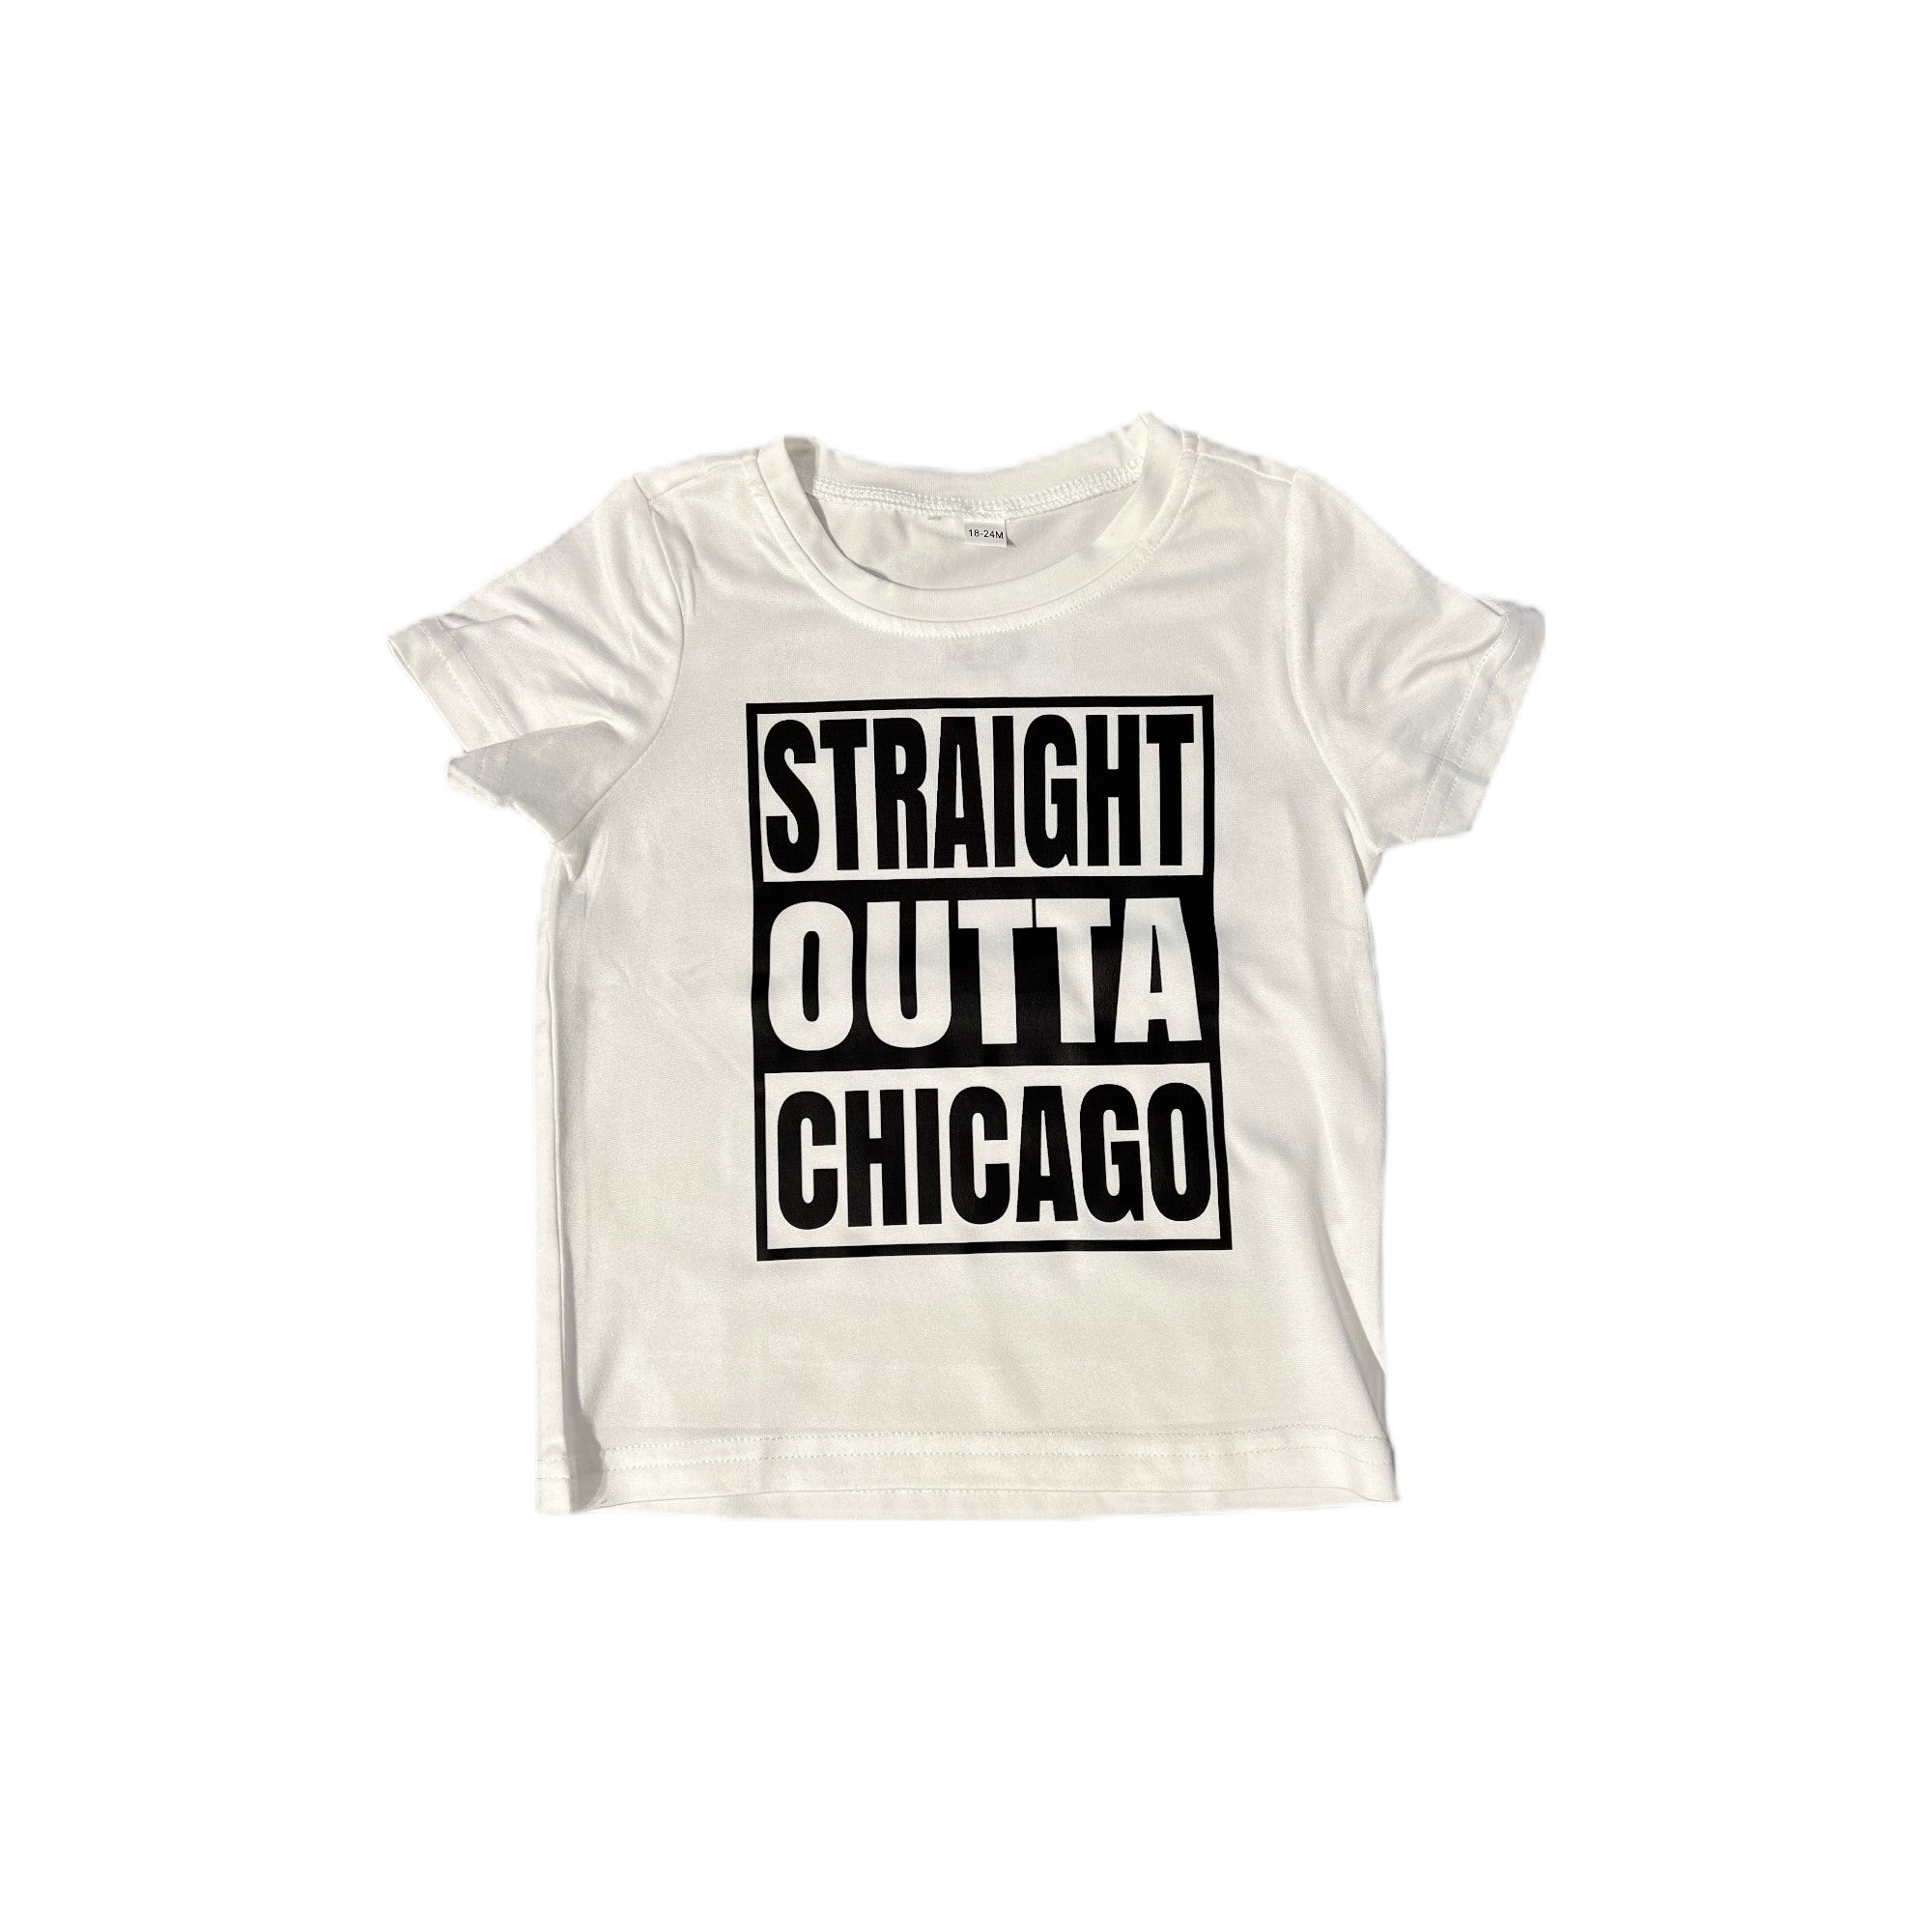 Straight Outta Chicago Tee - Twinkle Twinkle Little One